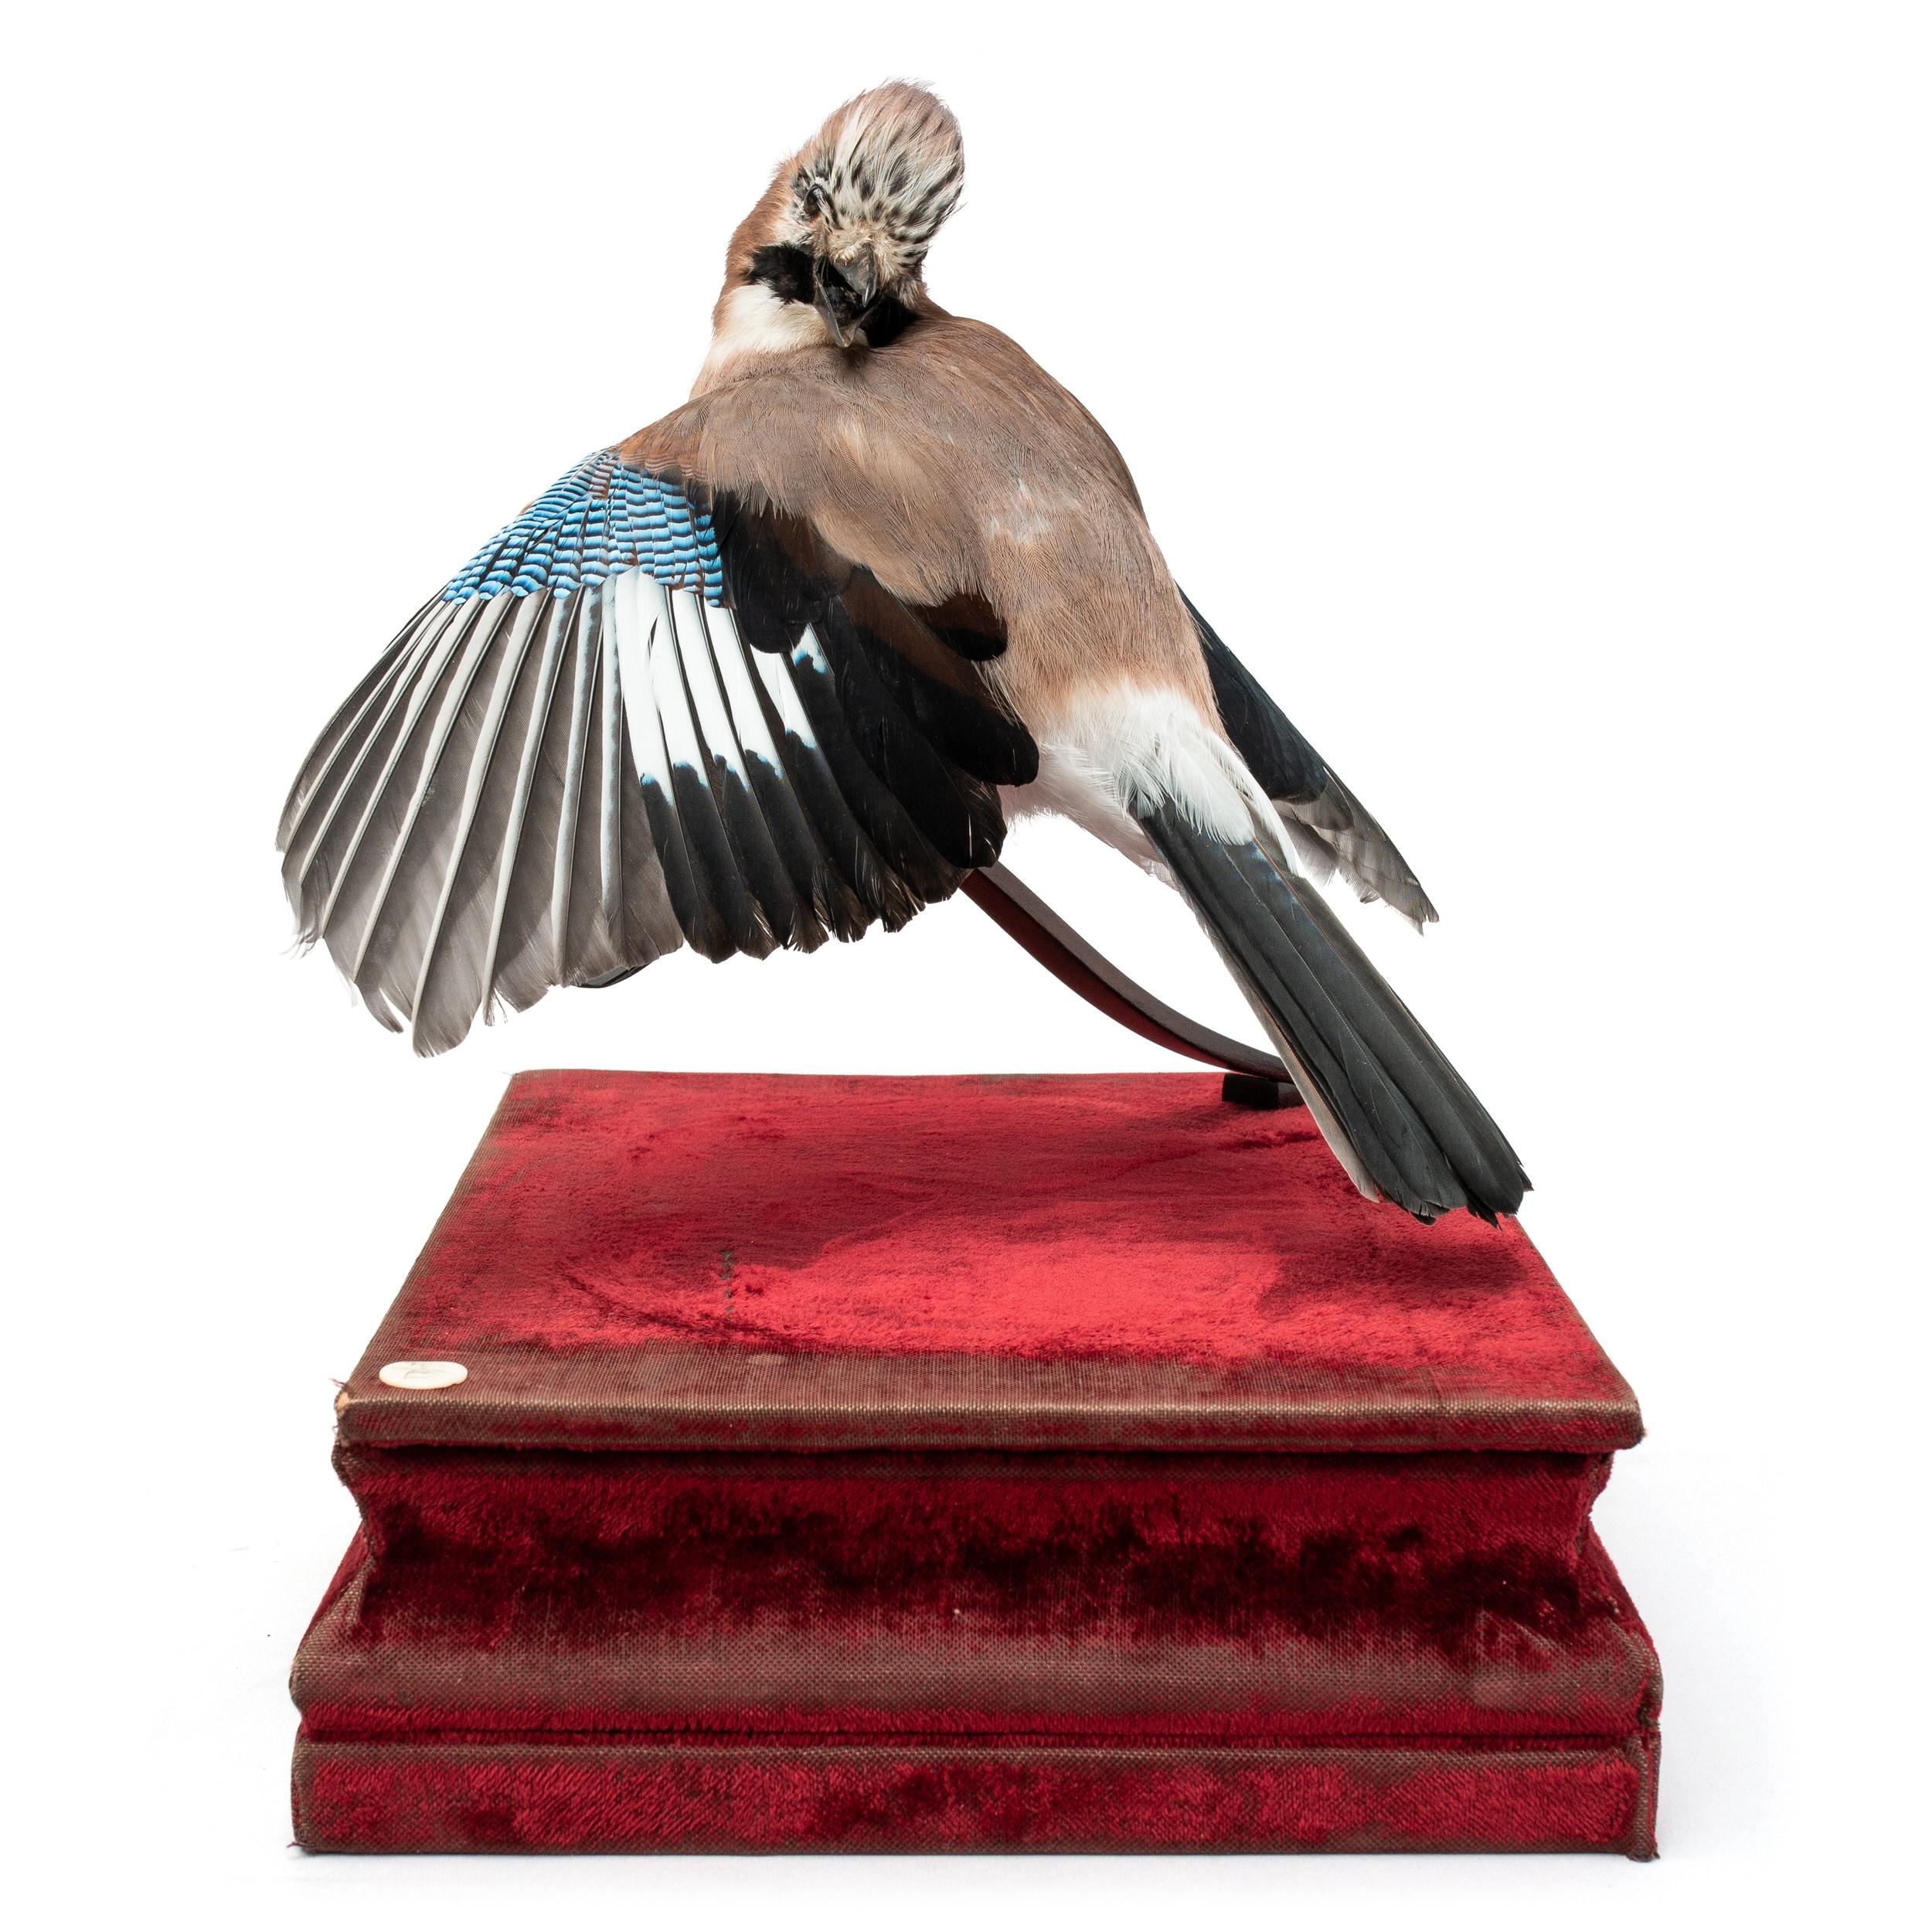 ‘Stills from a Courtship Dance’ is a series of fine taxidermy works with smaller exotic (rare) birds. Sinke and van Tongeren created this series of birds as if they suddenly seemed frozen during the lascivious work put into their mating